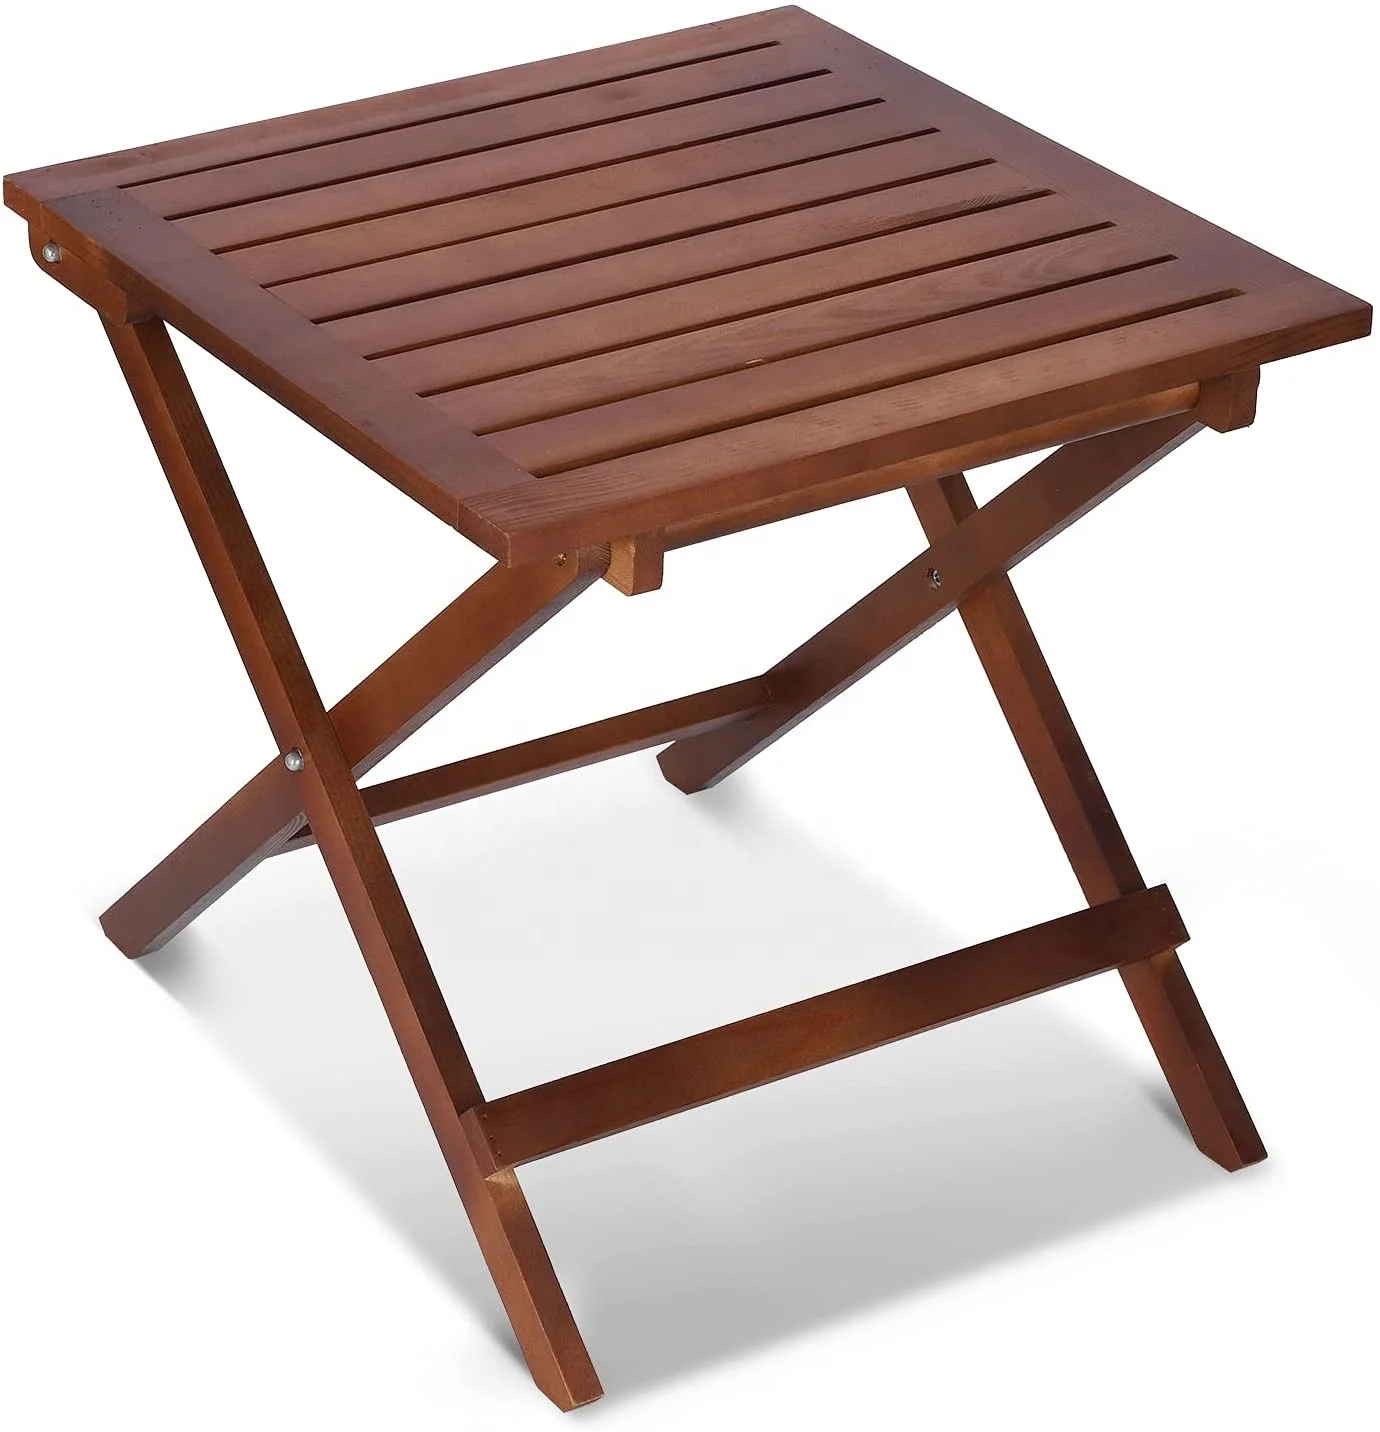 Side Table Coffee Folding Square Wood Patio Deck Garden Furniture